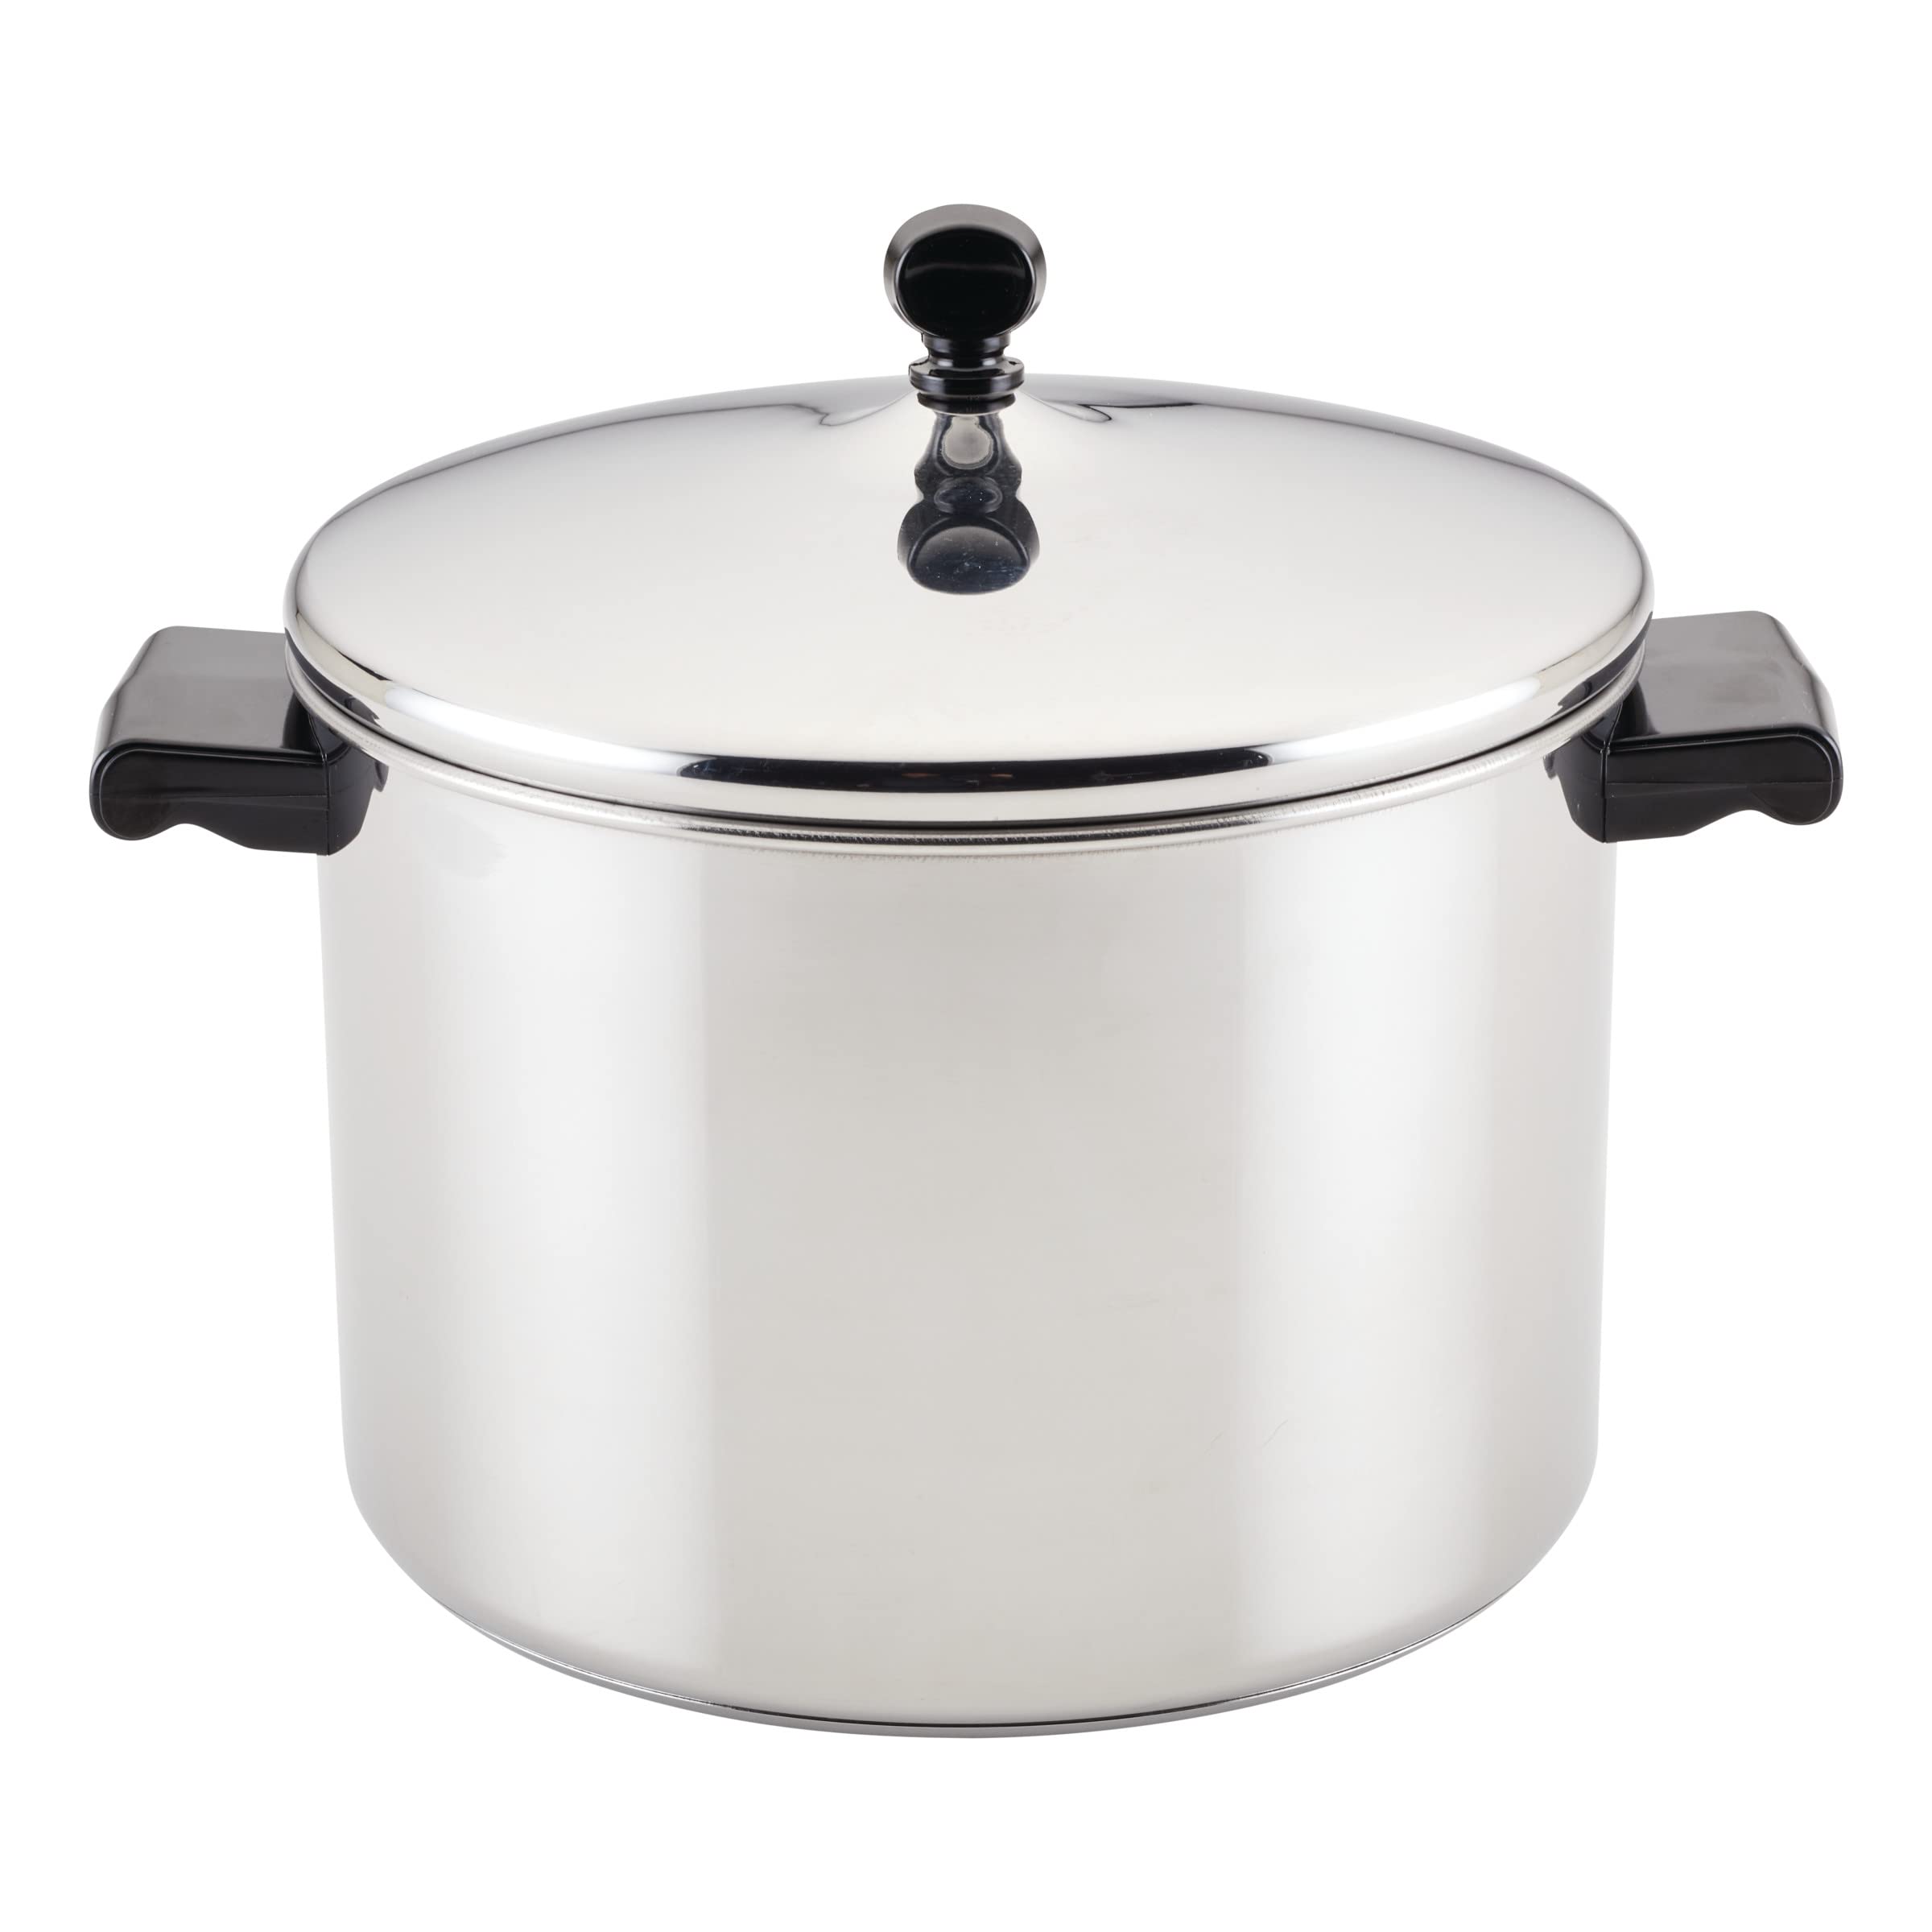 Farberware Classic Stainless Steel 8-Quart Stockpot with Lid $34